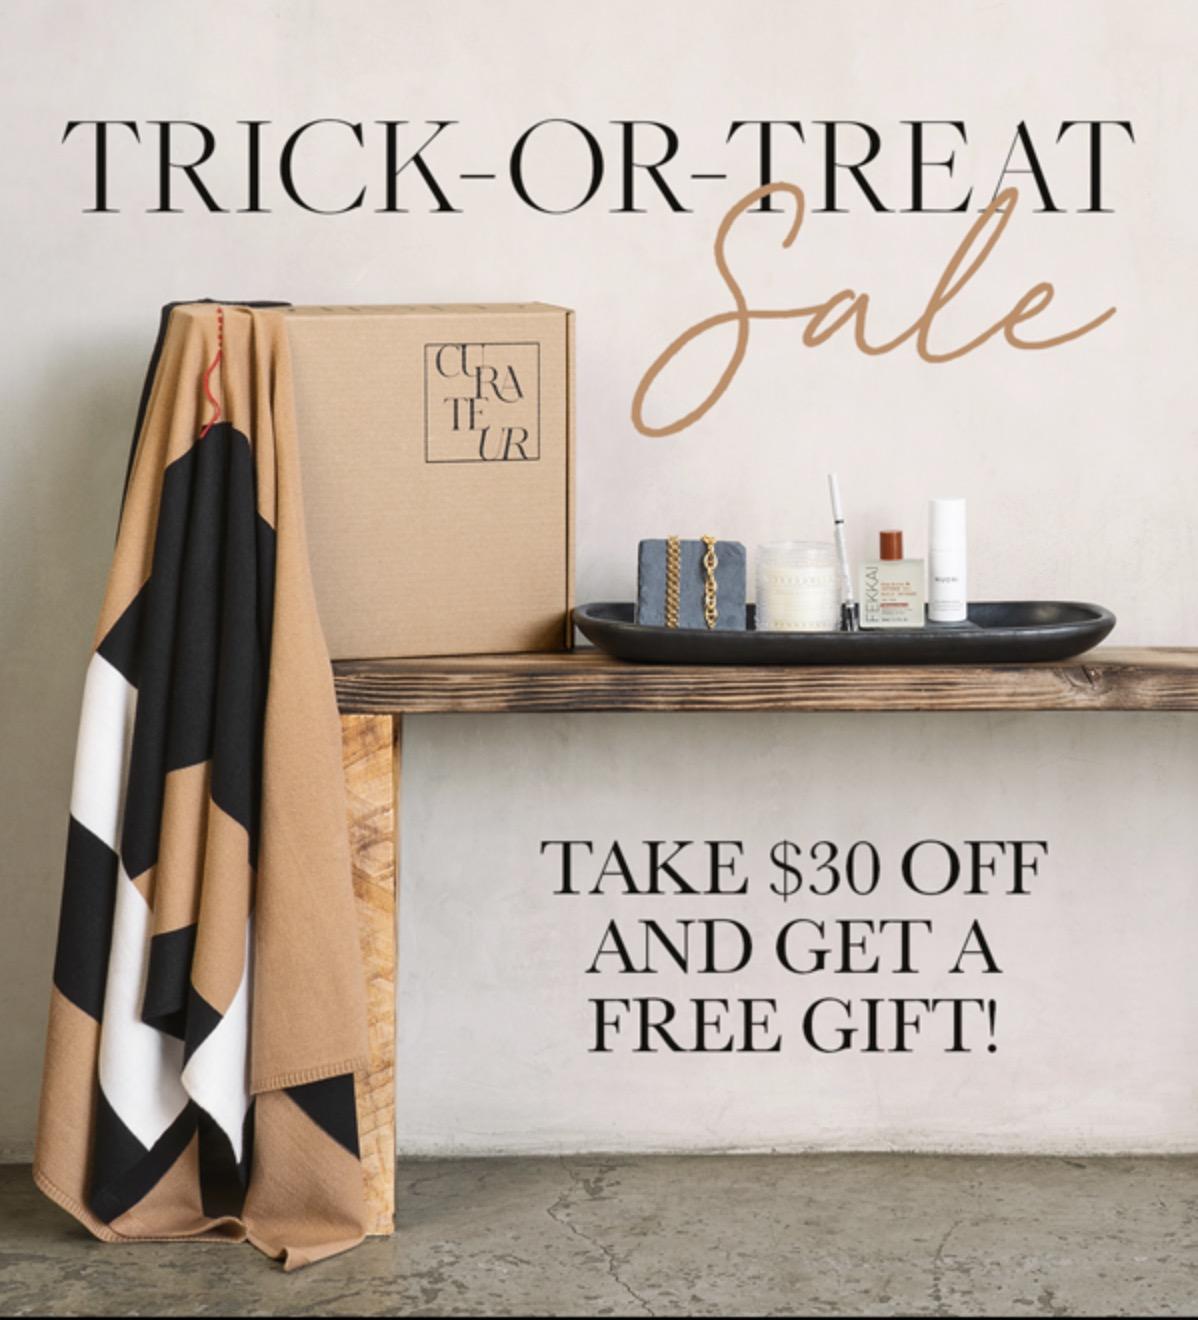 CURATEUR Fall 2021 Coupon Code – Save $30 + Free Mystery Gift